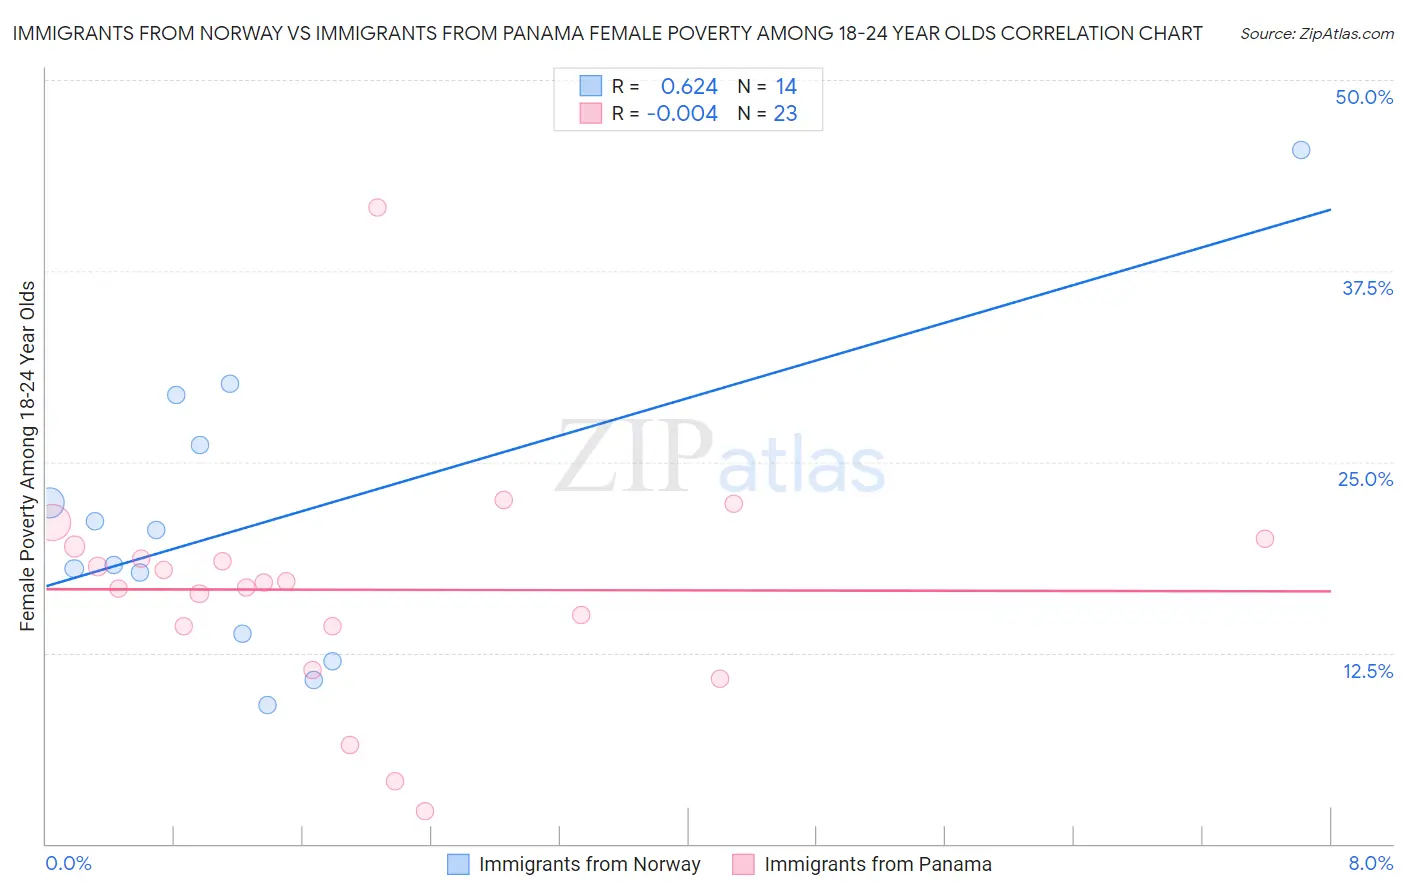 Immigrants from Norway vs Immigrants from Panama Female Poverty Among 18-24 Year Olds